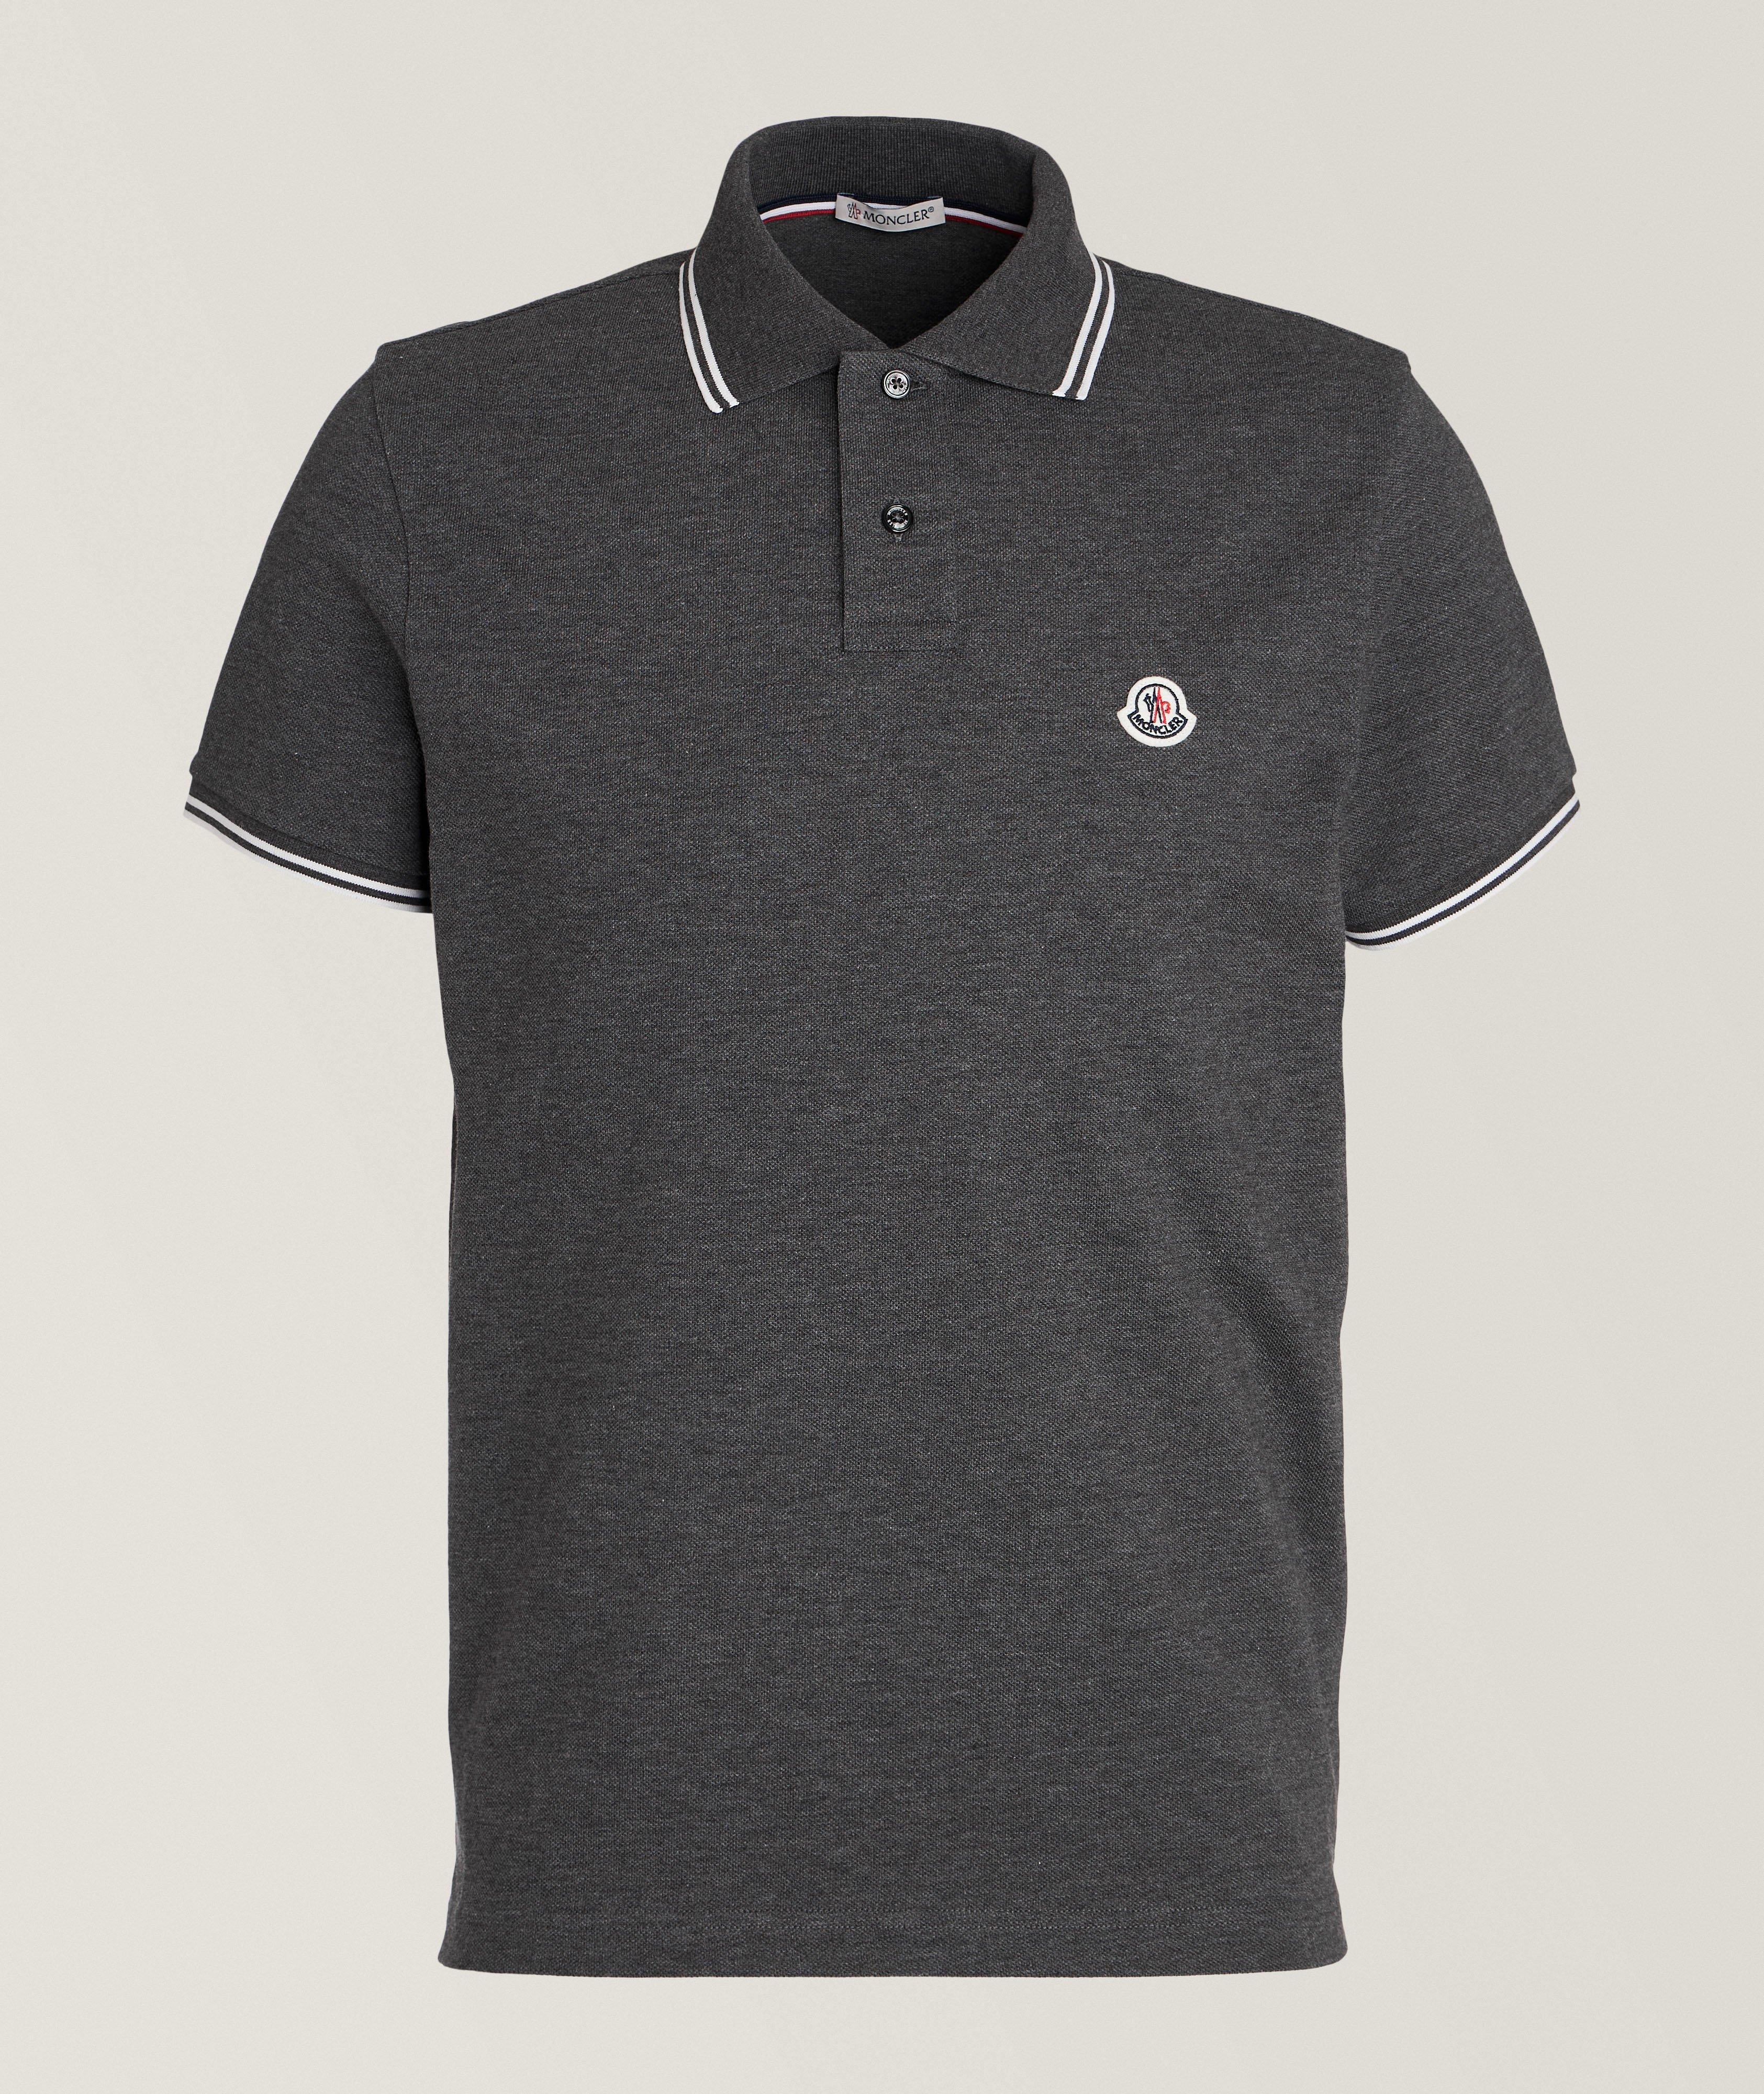 Contrast Stripe Tipped Polo image 0